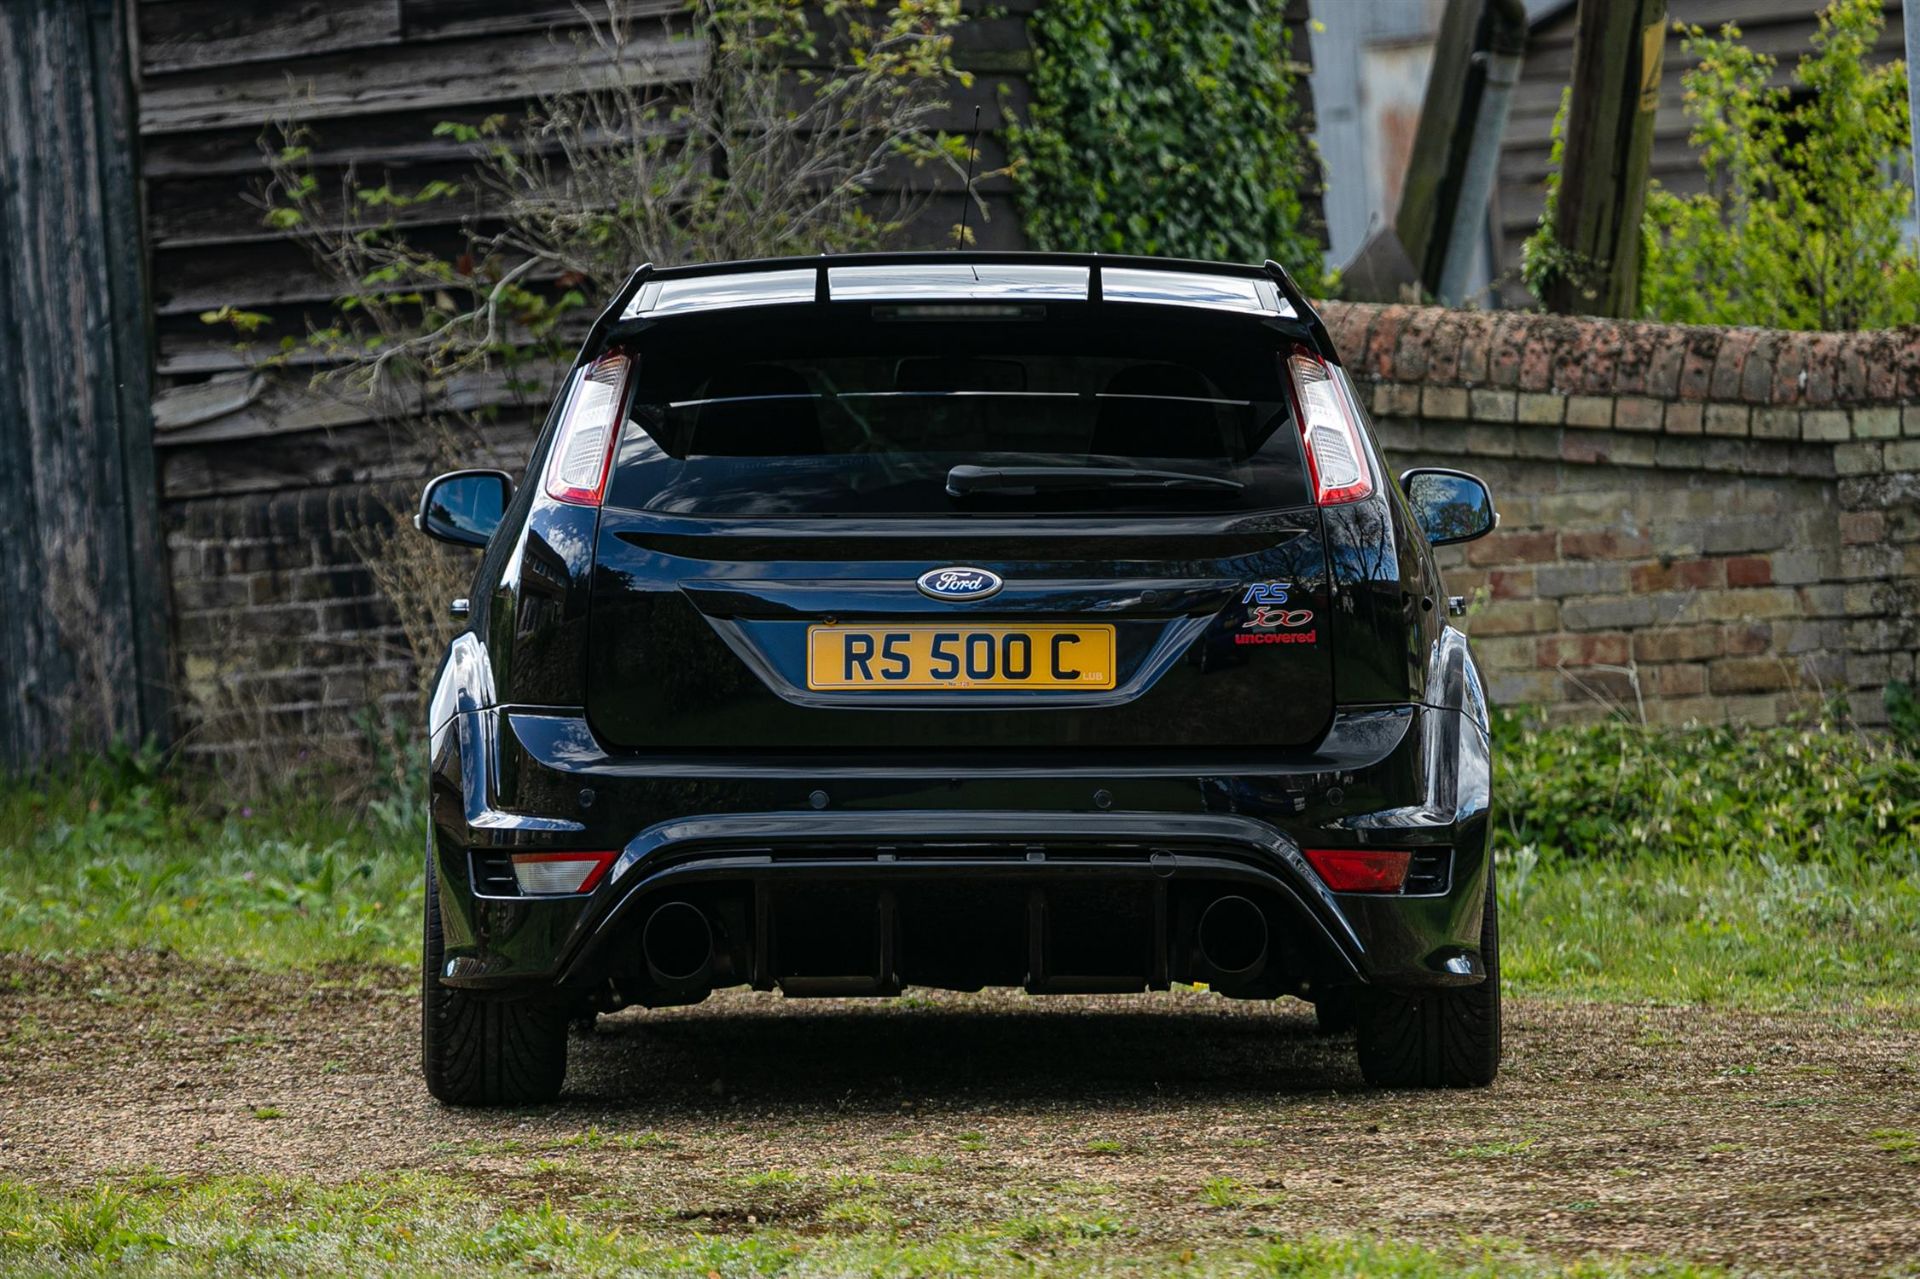 2010 Ford Focus RS500 #128 - 7,700 Miles - Image 7 of 10